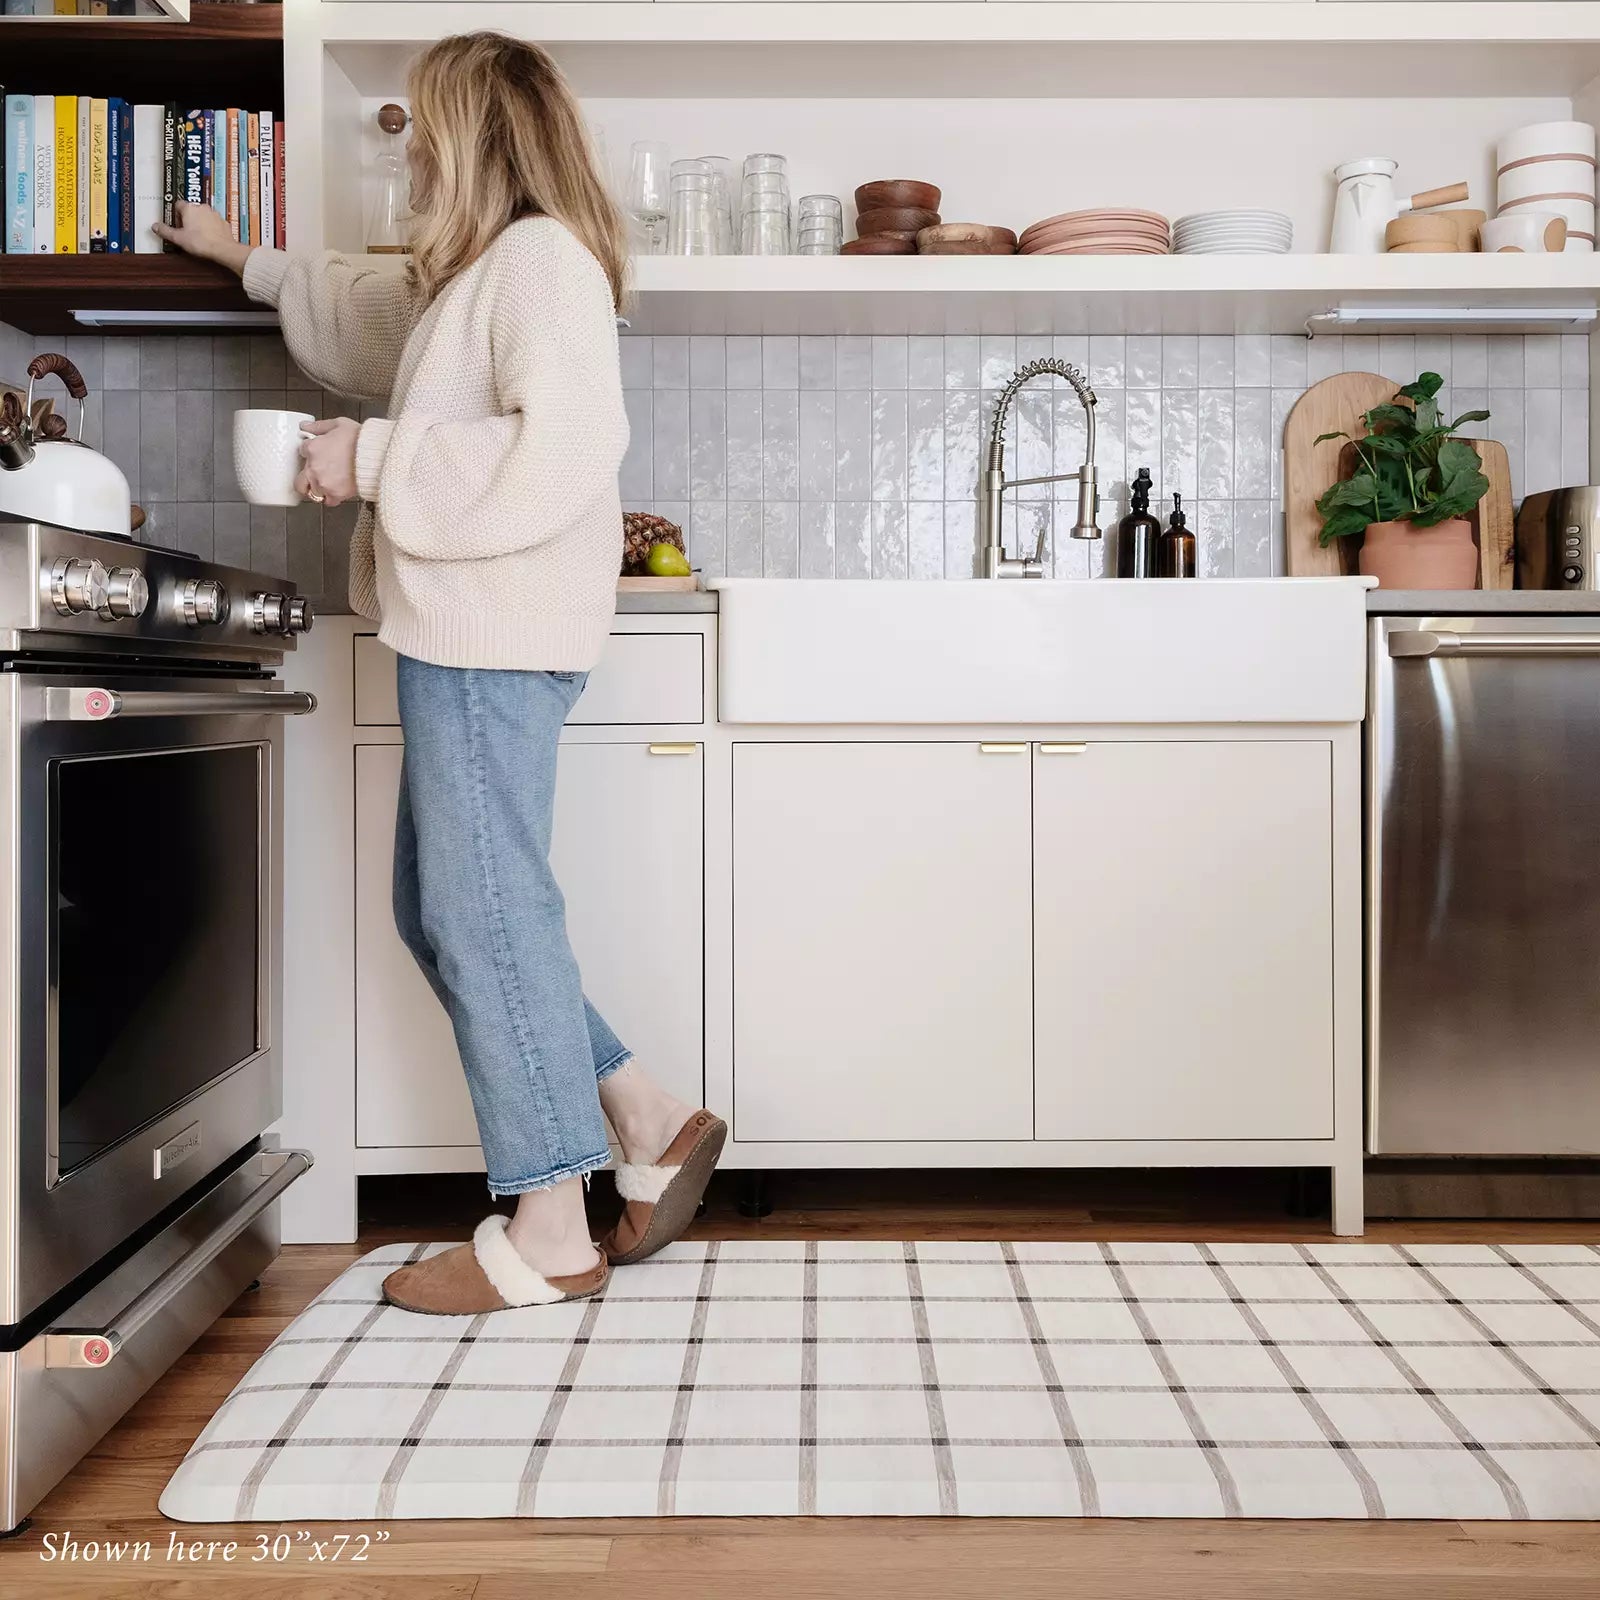 Windowpane Neutral Grid Pattern Standing Mat shown in kitchen with woman drinking coffee